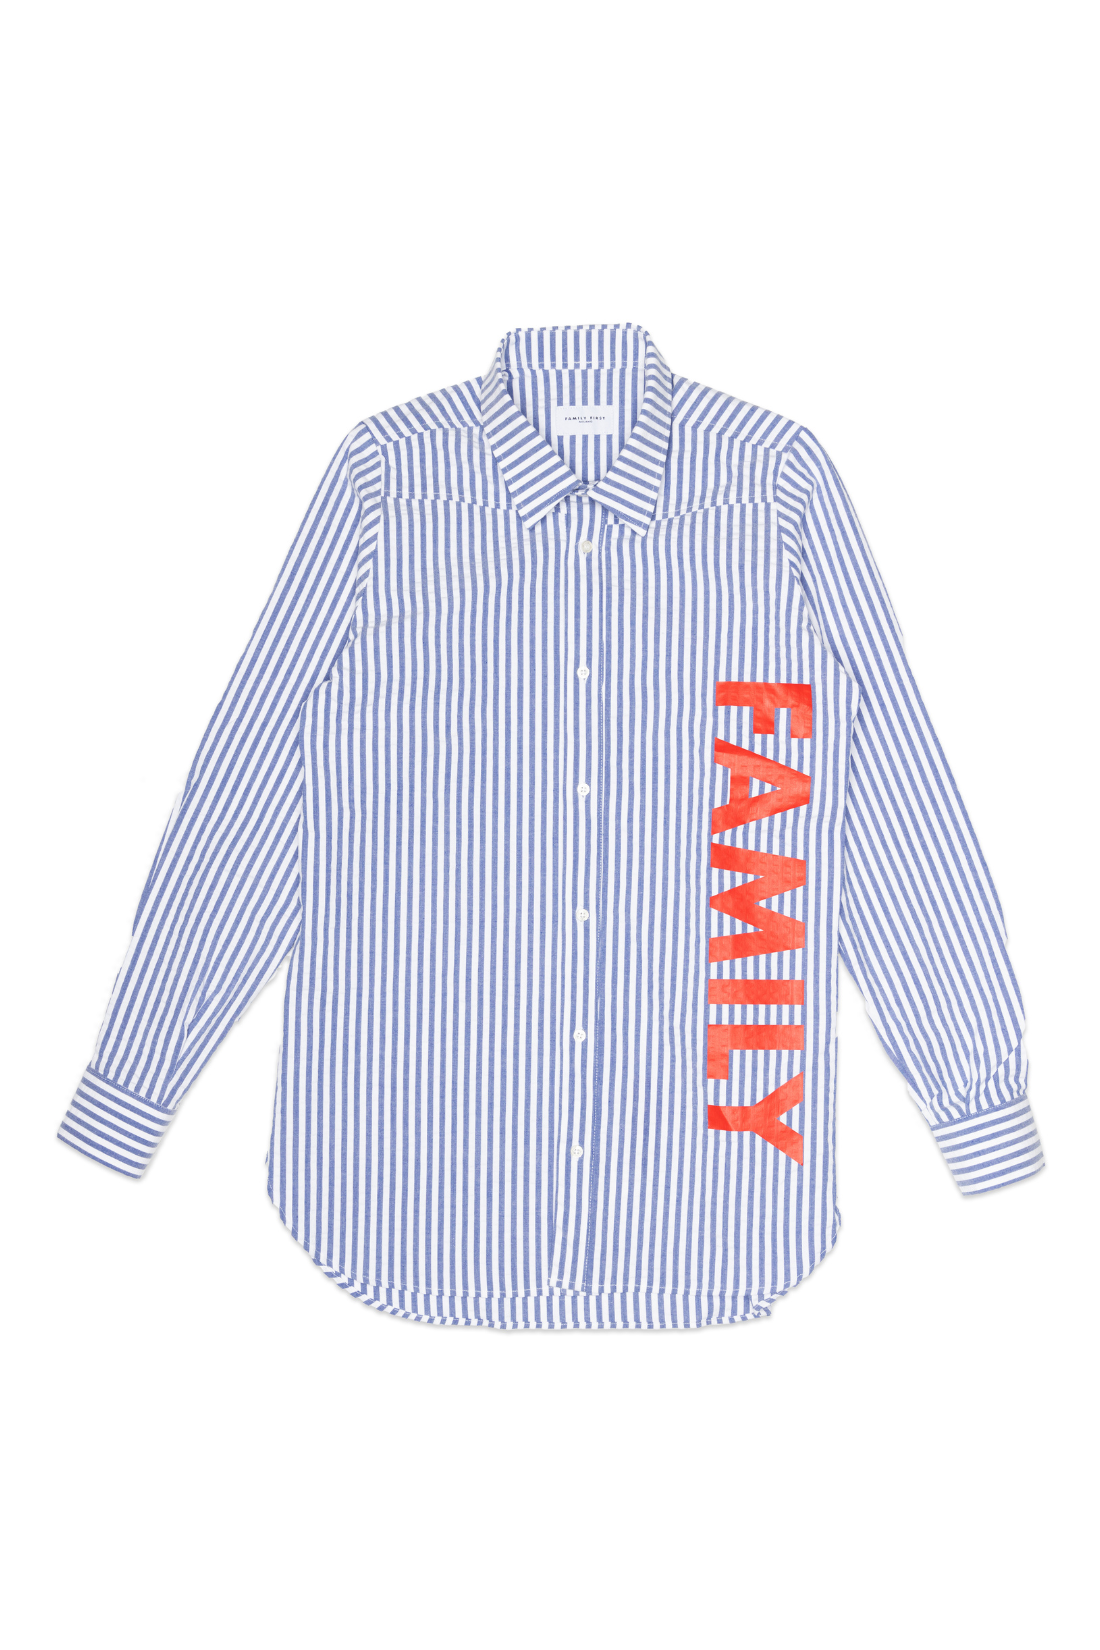 FAMILY STRIPED BUTTON UP